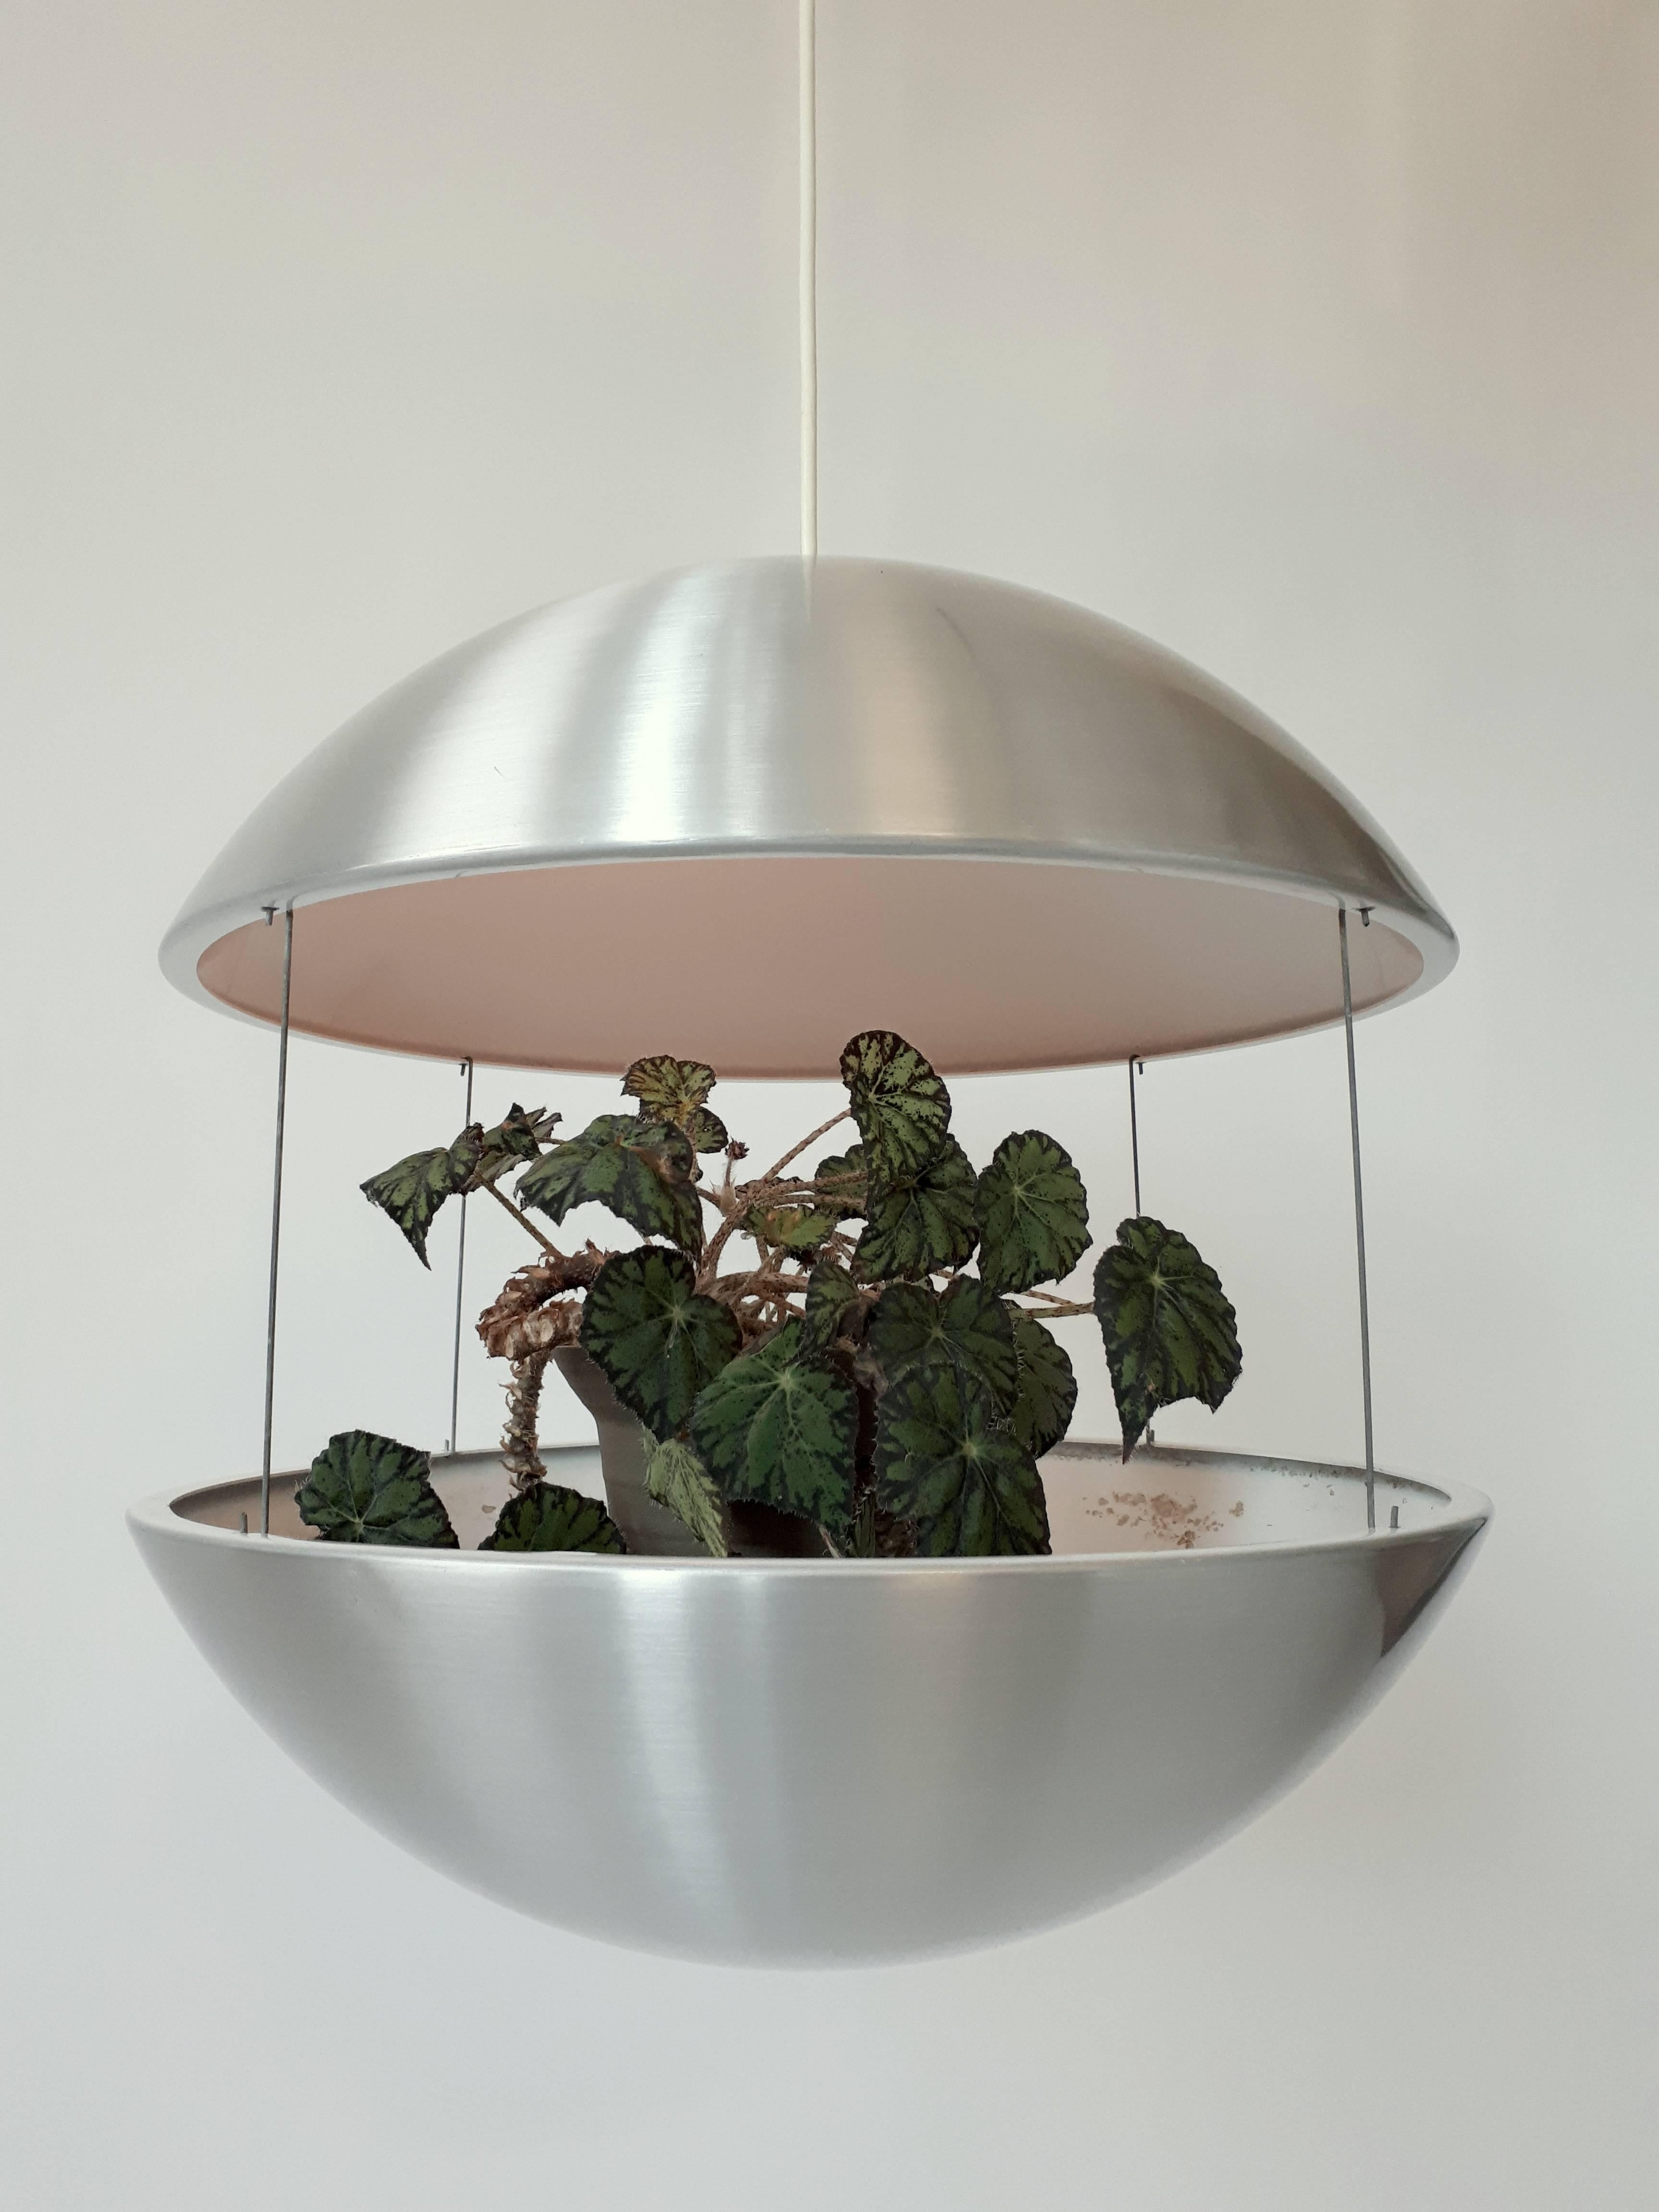 Large lighted planter pendant consisting of two brushed and lacquered aluminium halves hung together by four thin steel rods. 

The vented top part has a regular E26 size socket rated at 60 watts max. 

Measure 18 inches wide by 18 inches high.